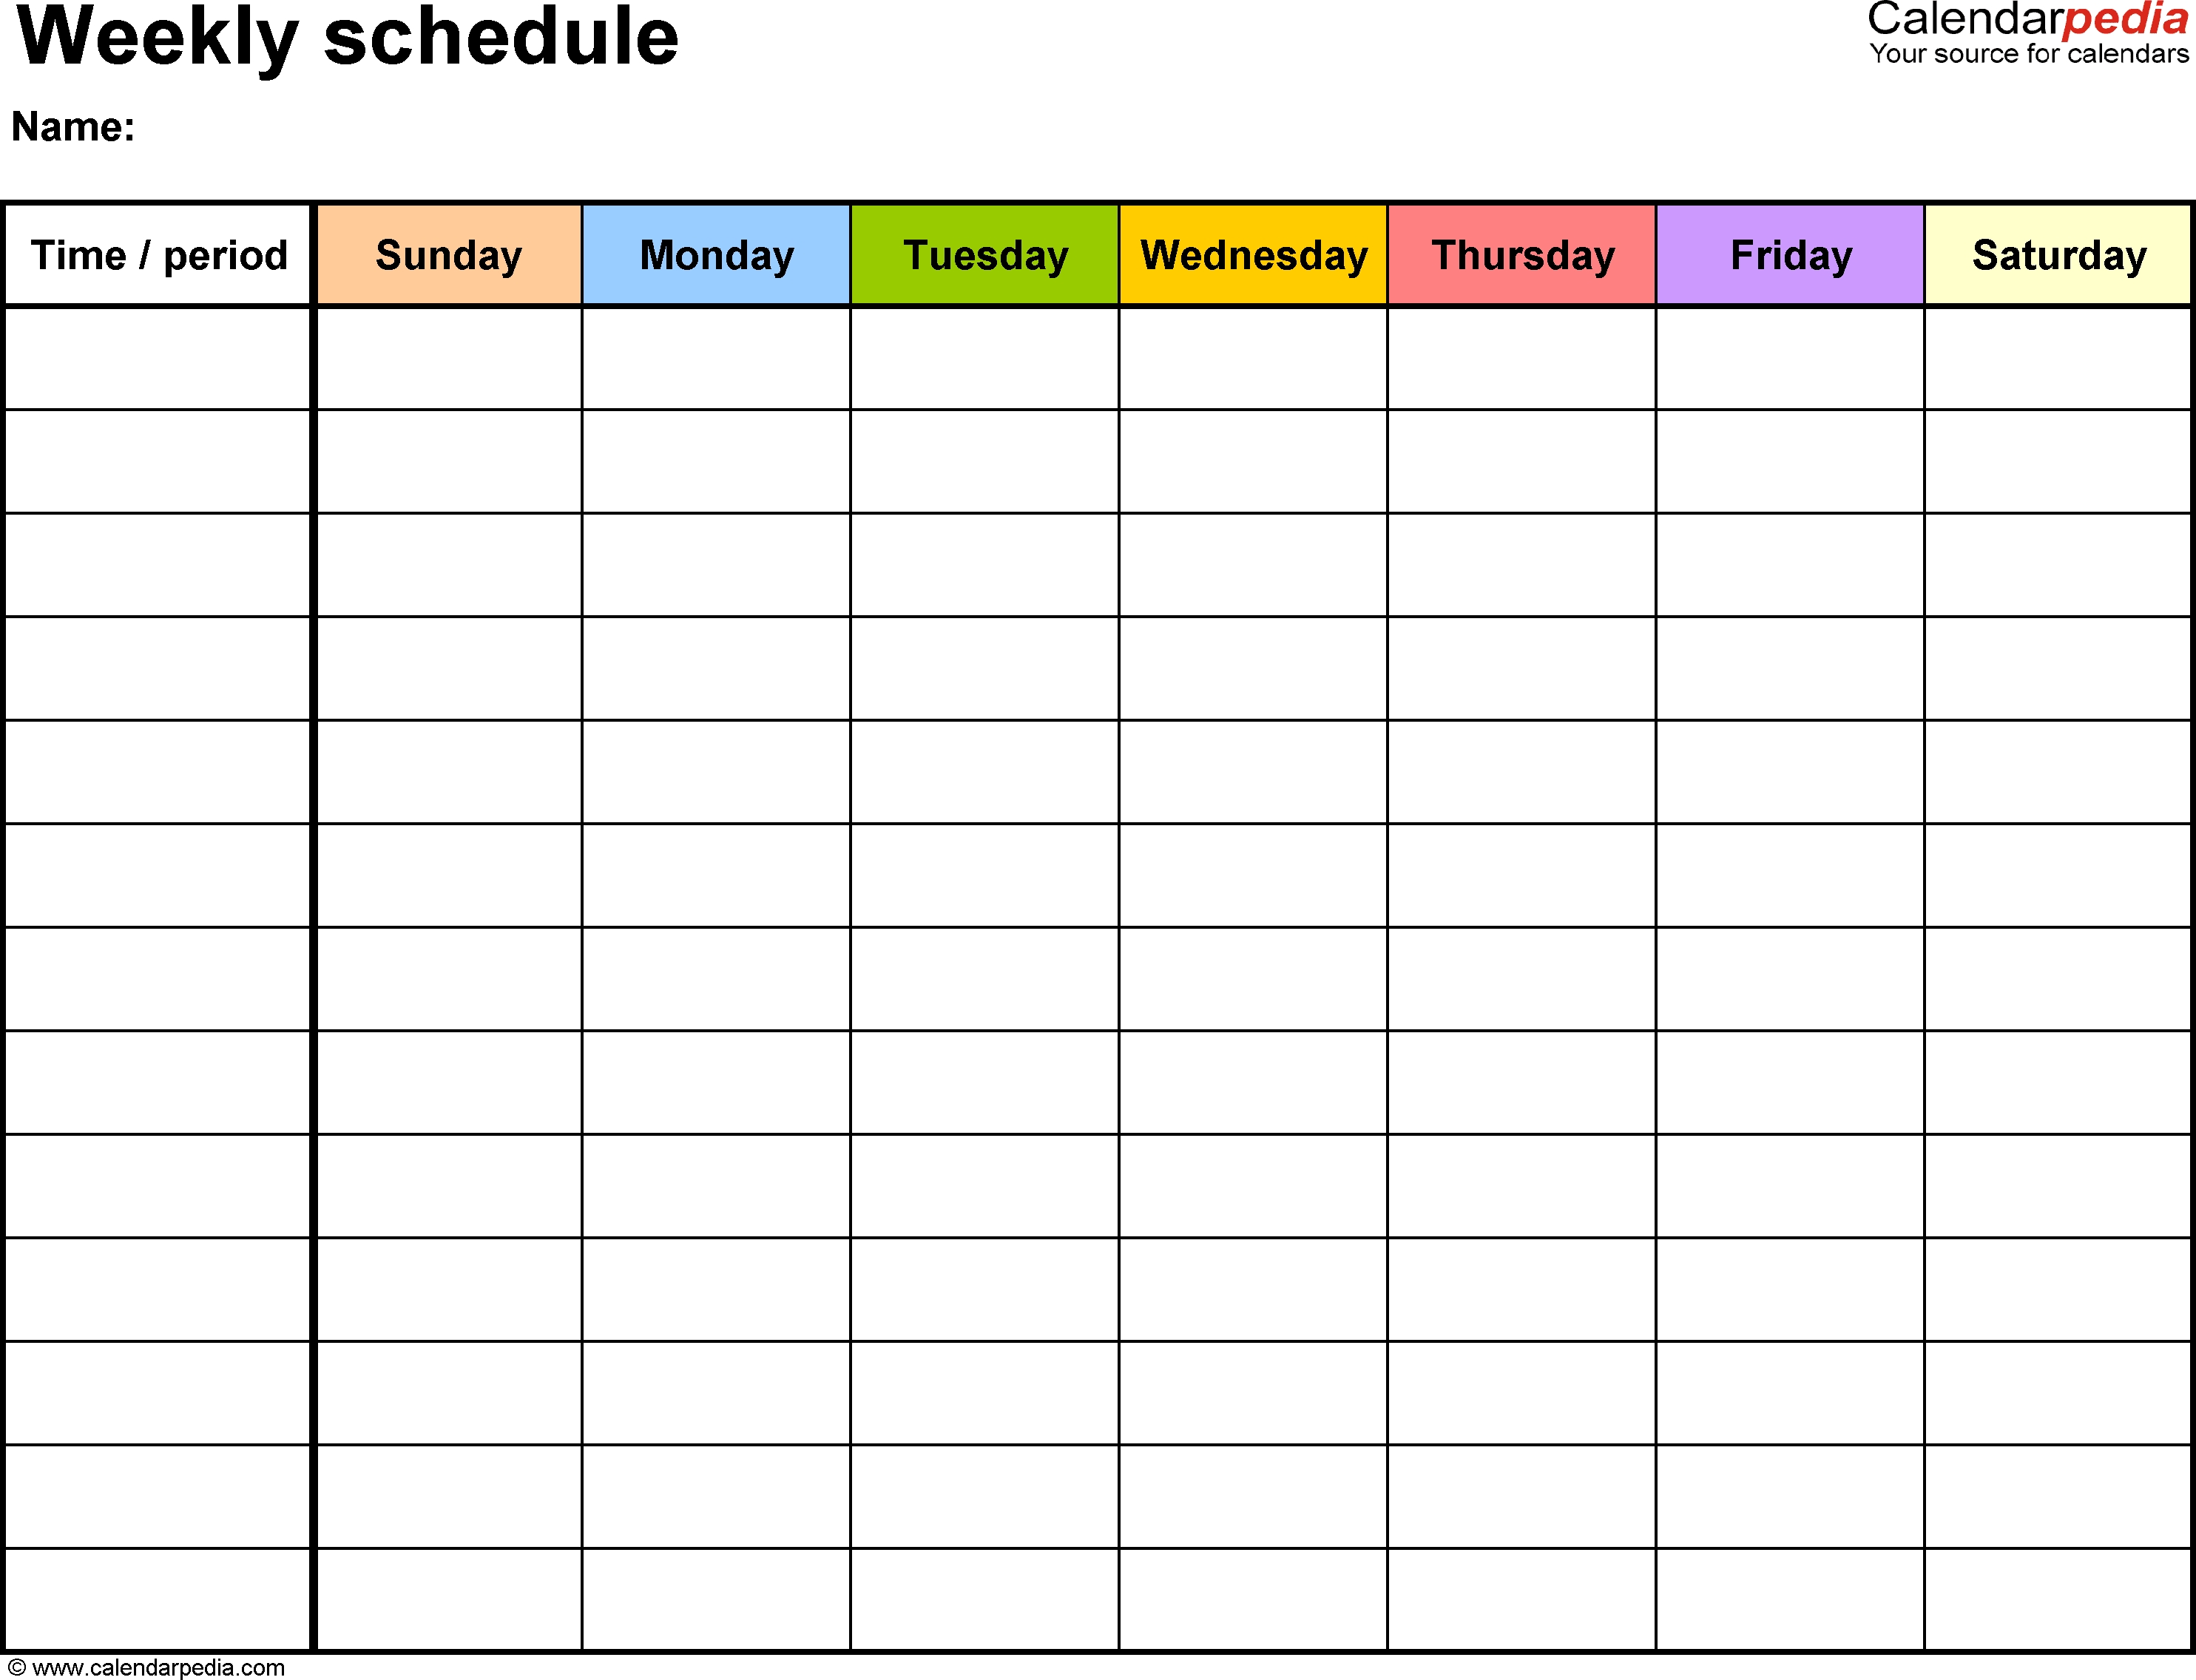 Free Weekly Schedule Templates For Excel - 18 Templates | ~Yoga with regard to Free Blank Printable Weekly Calendar Template